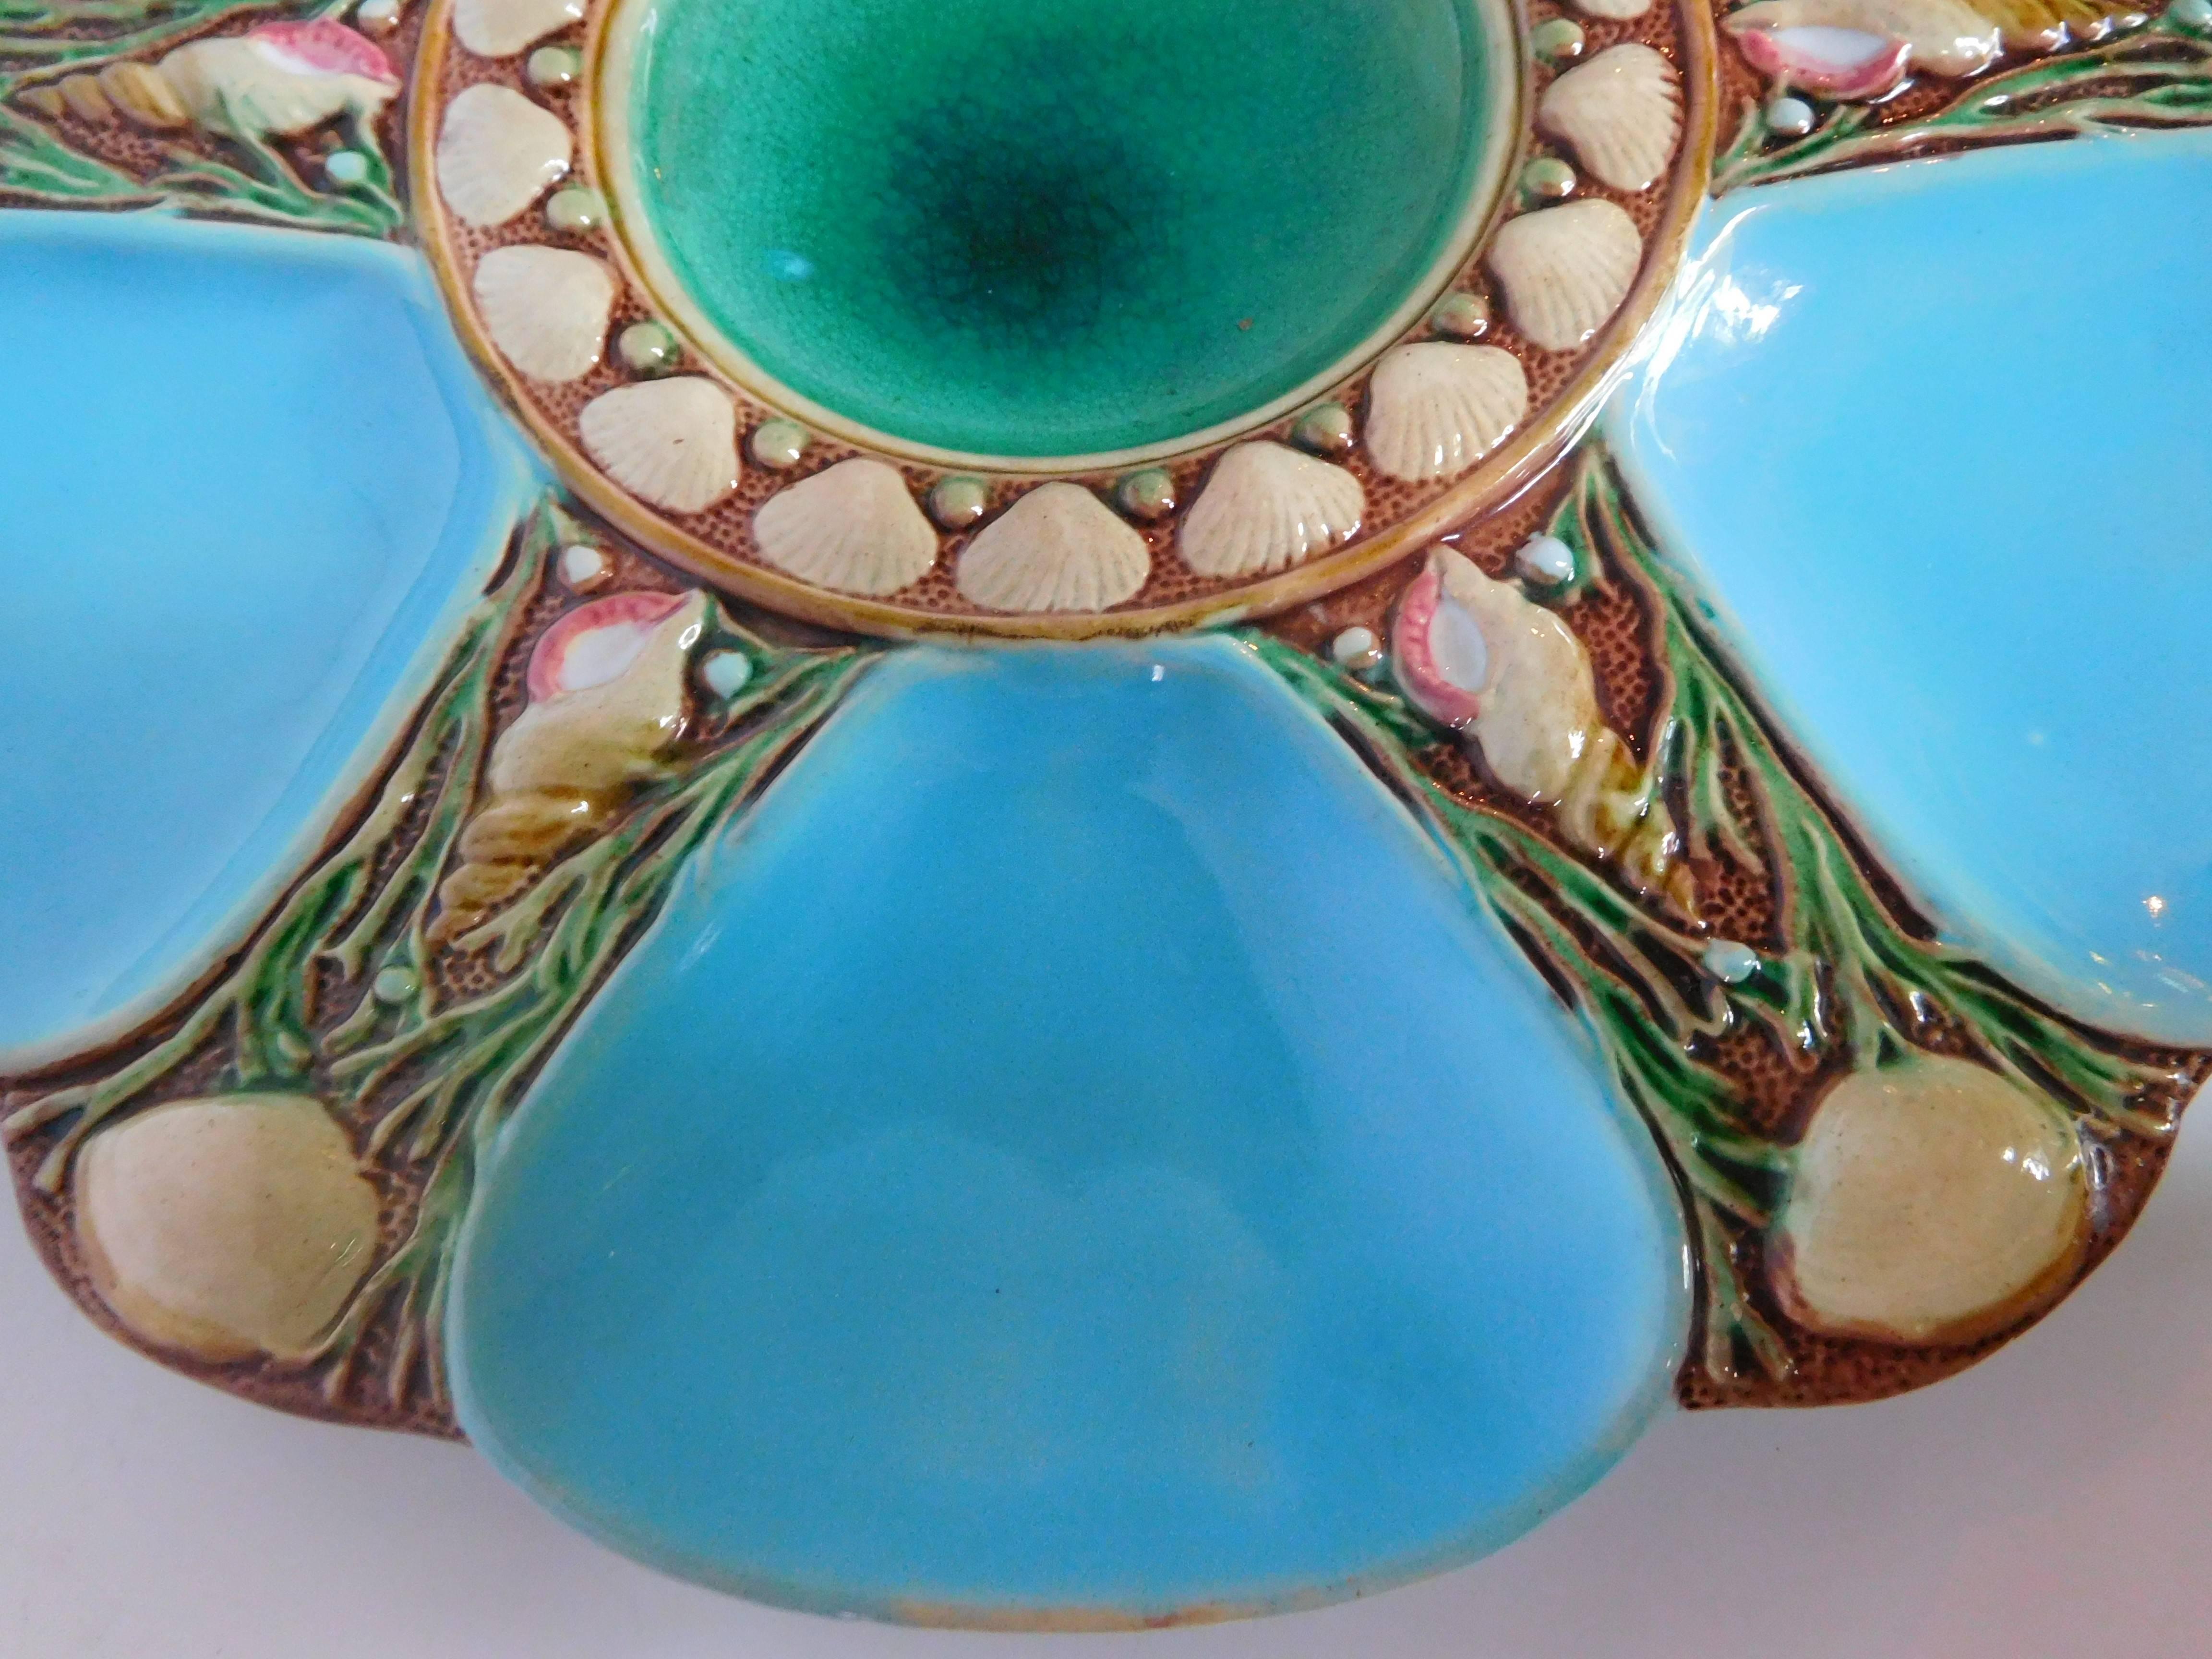 Ceramic Minton Majolica Oyster Plate in Turquoise and Green, England, 1868